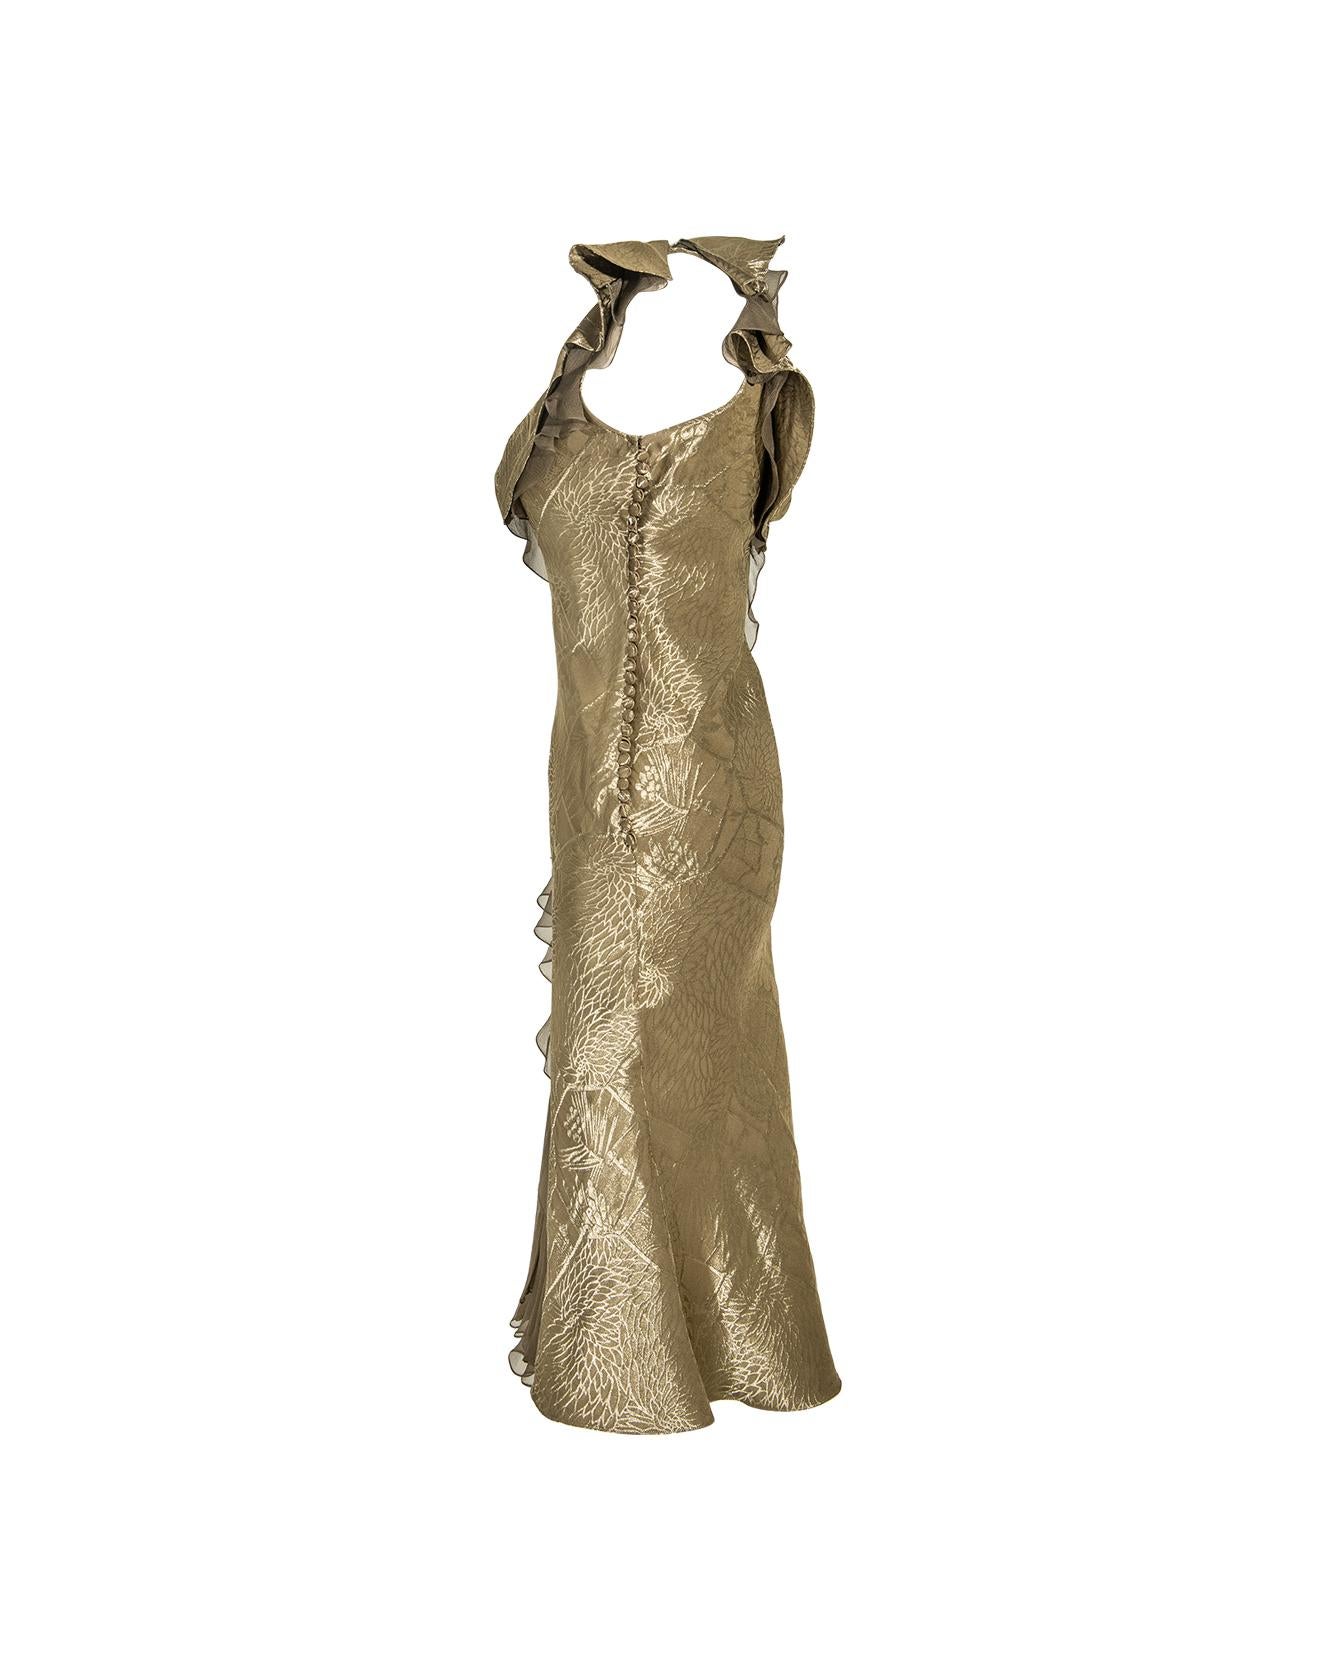 S/S 2003 Christian Dior by John Galliano silk midi dress. Olive 1930's style slip dress with gold lame floral brocade print. Semi sheer silk chiffon ruffle detail throughout and signature John Galliano '1930's' fabric covered buttons down the side.